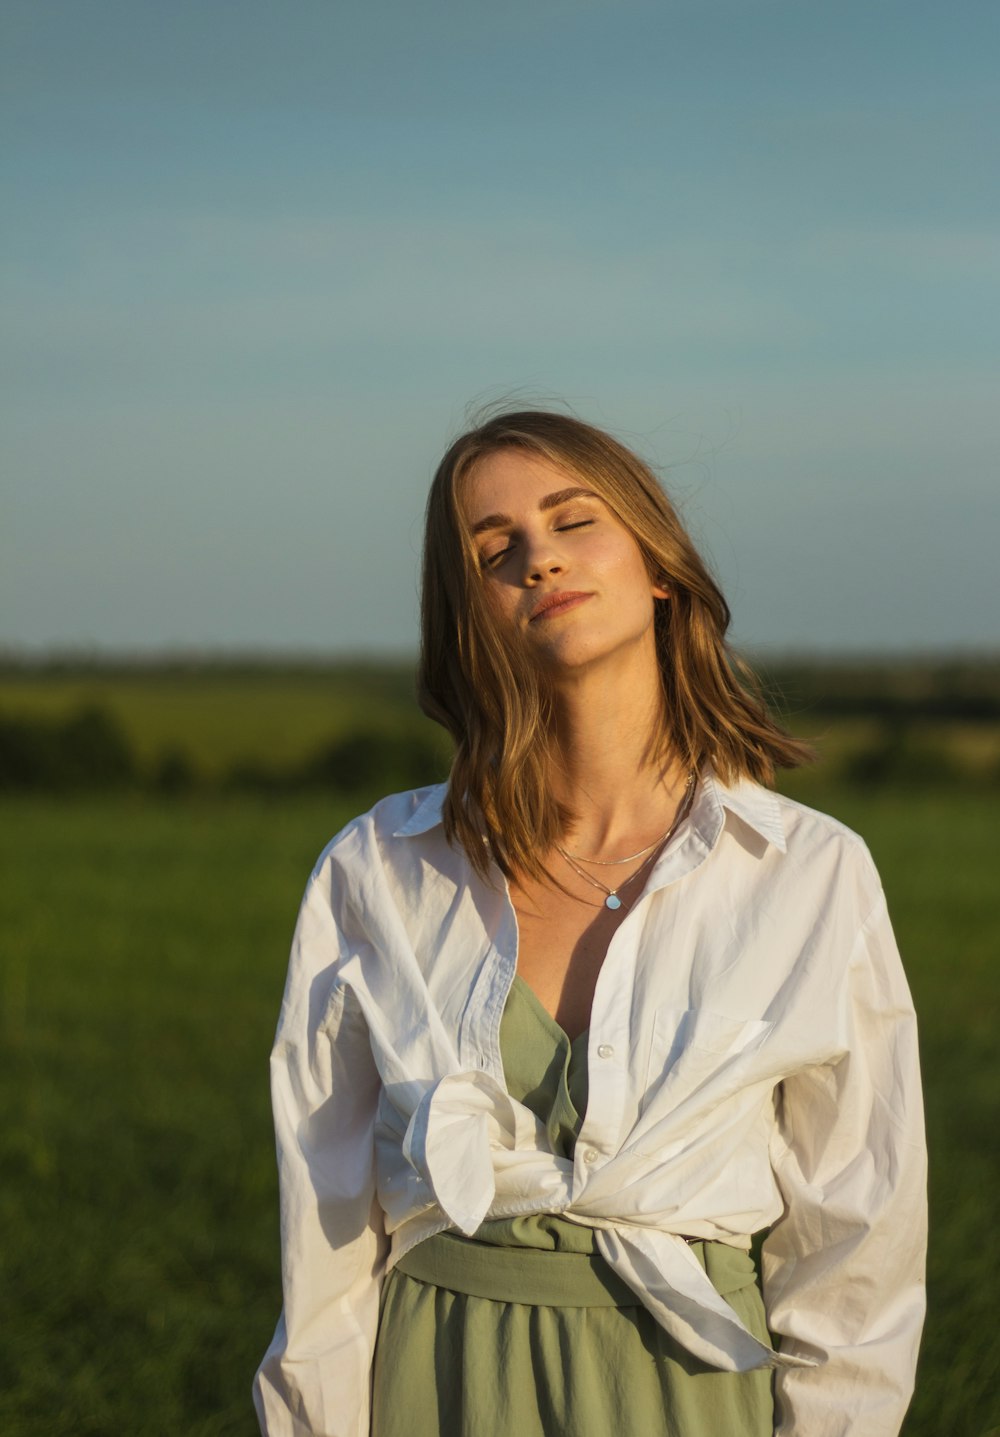 woman in white button up shirt standing on green grass field during daytime